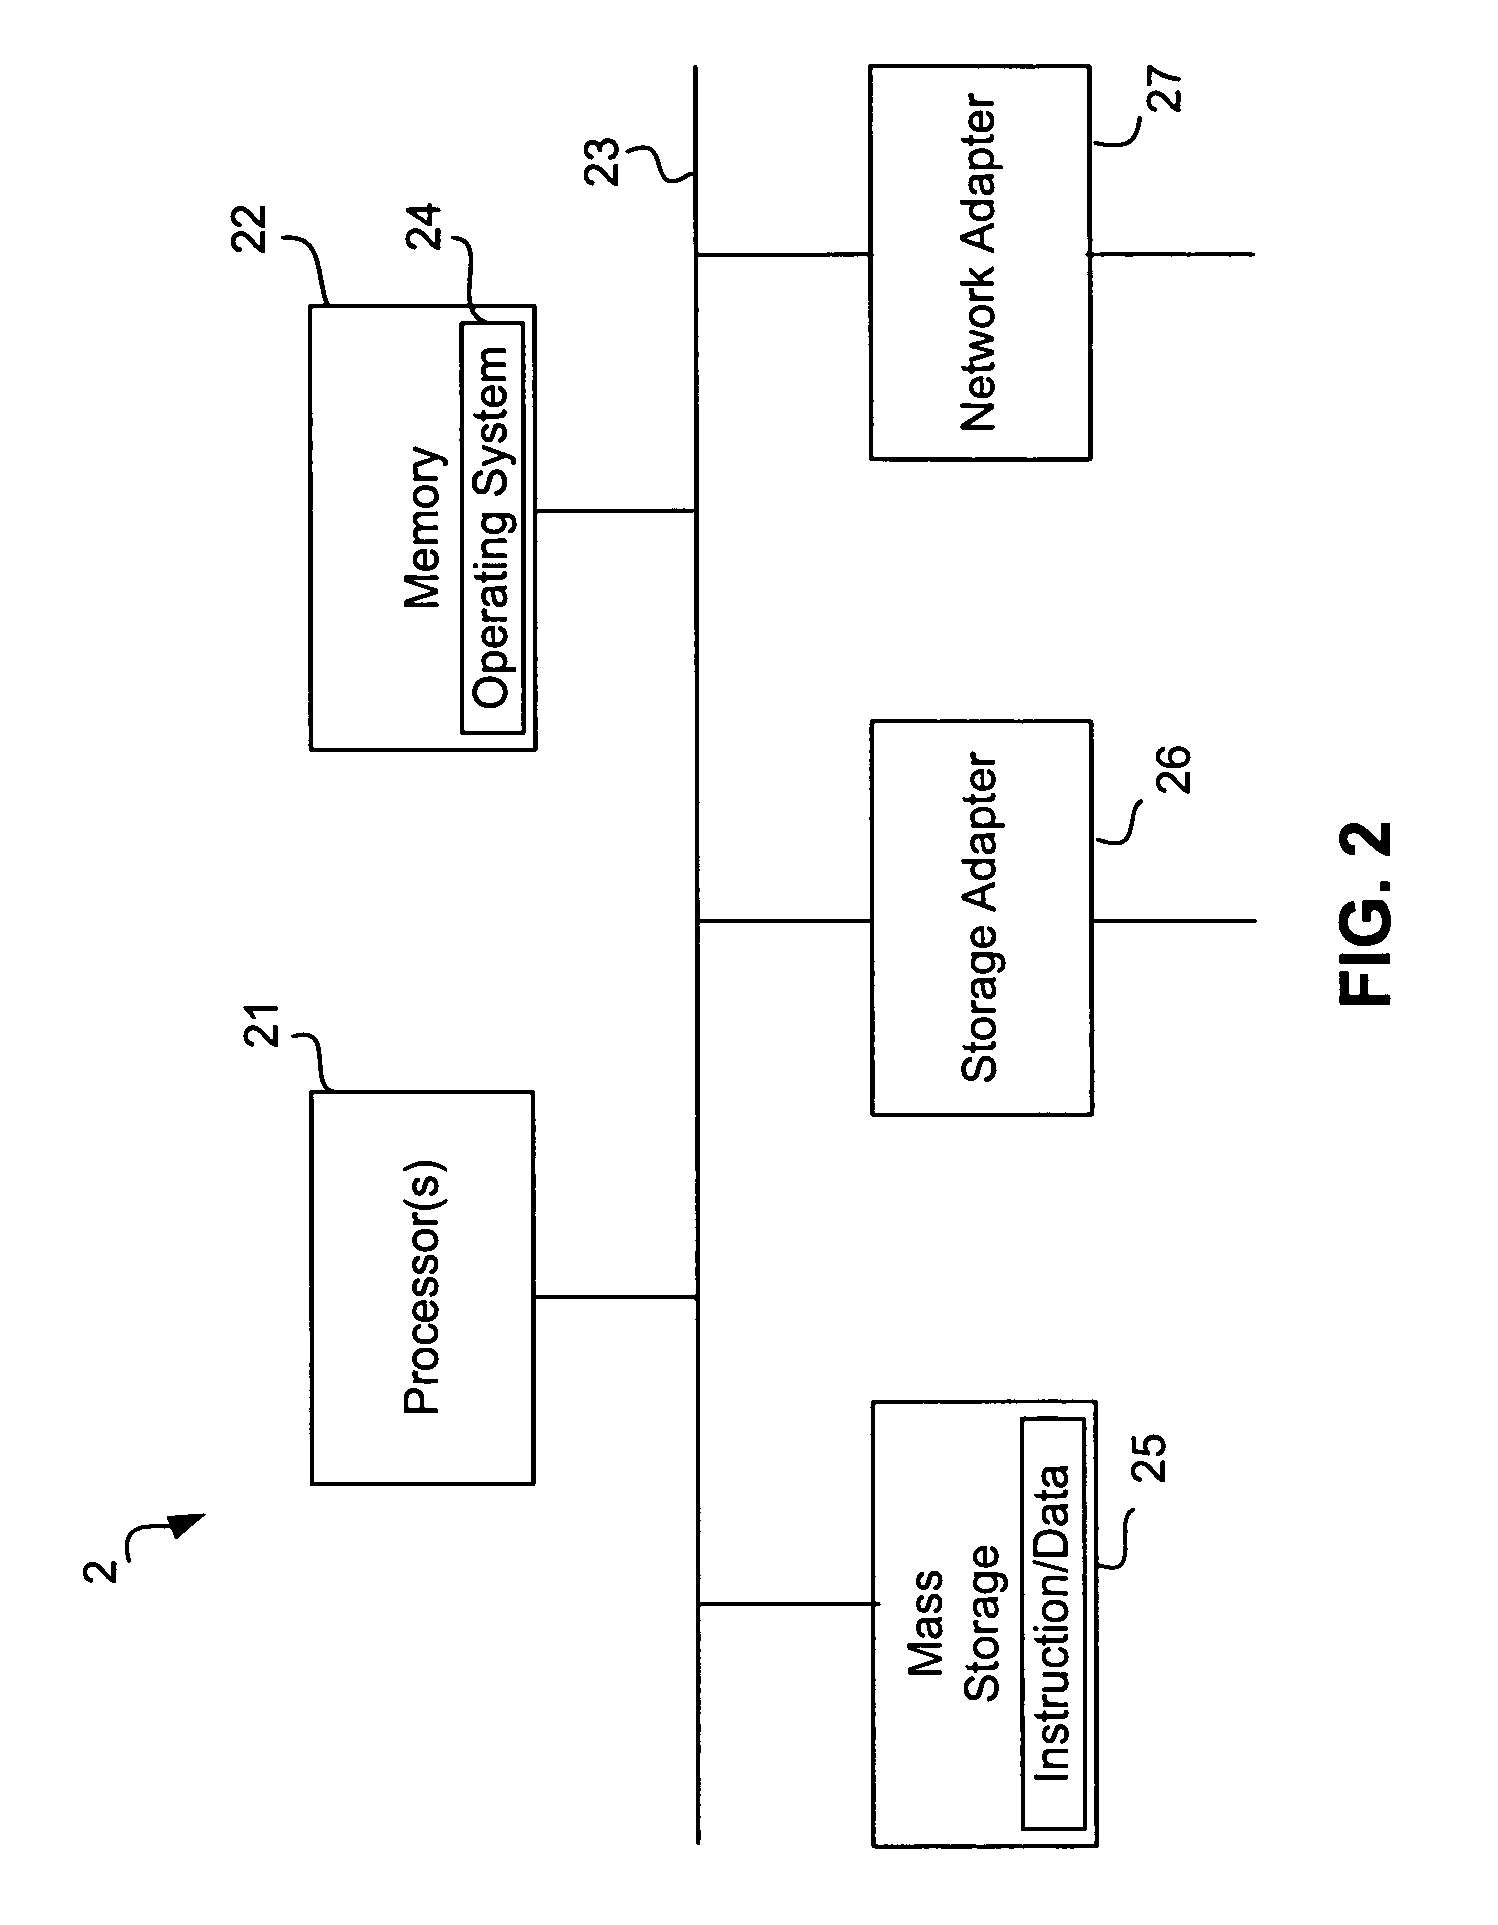 Method and system to make a read-only file system appear to be writeable